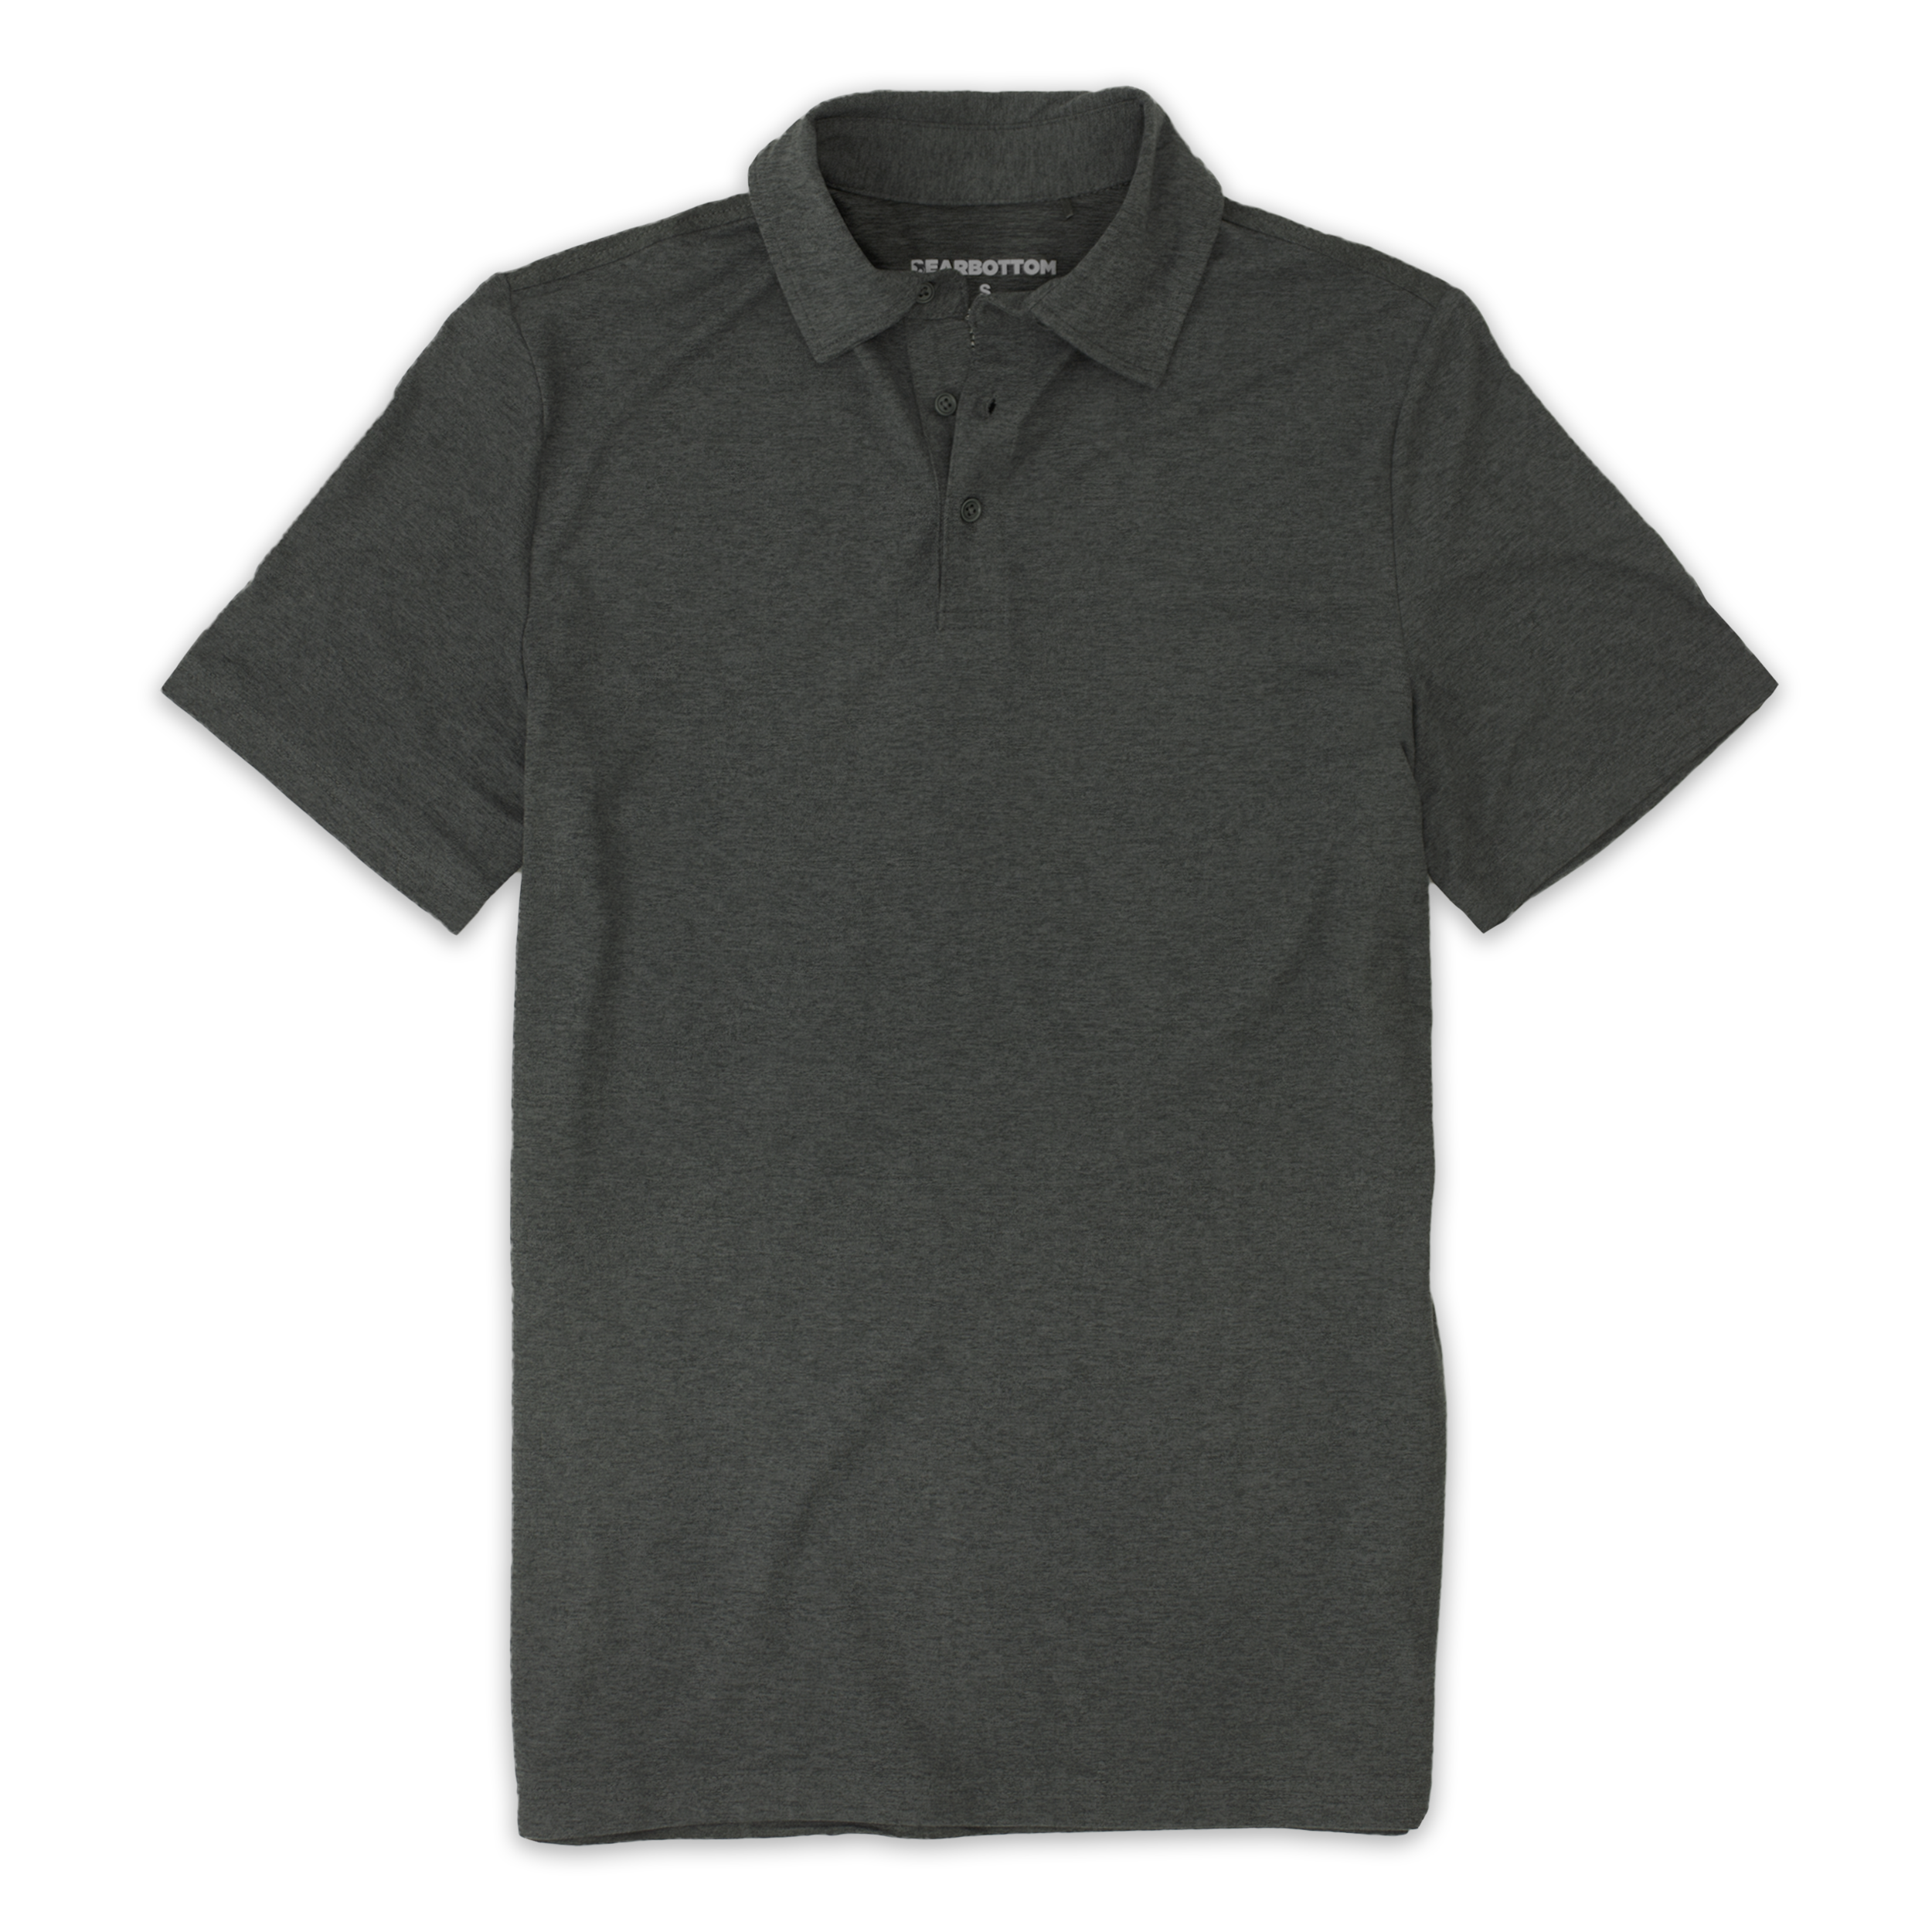 Tech Polo Charcoal Grey Front with 3 charcoal grey buttons